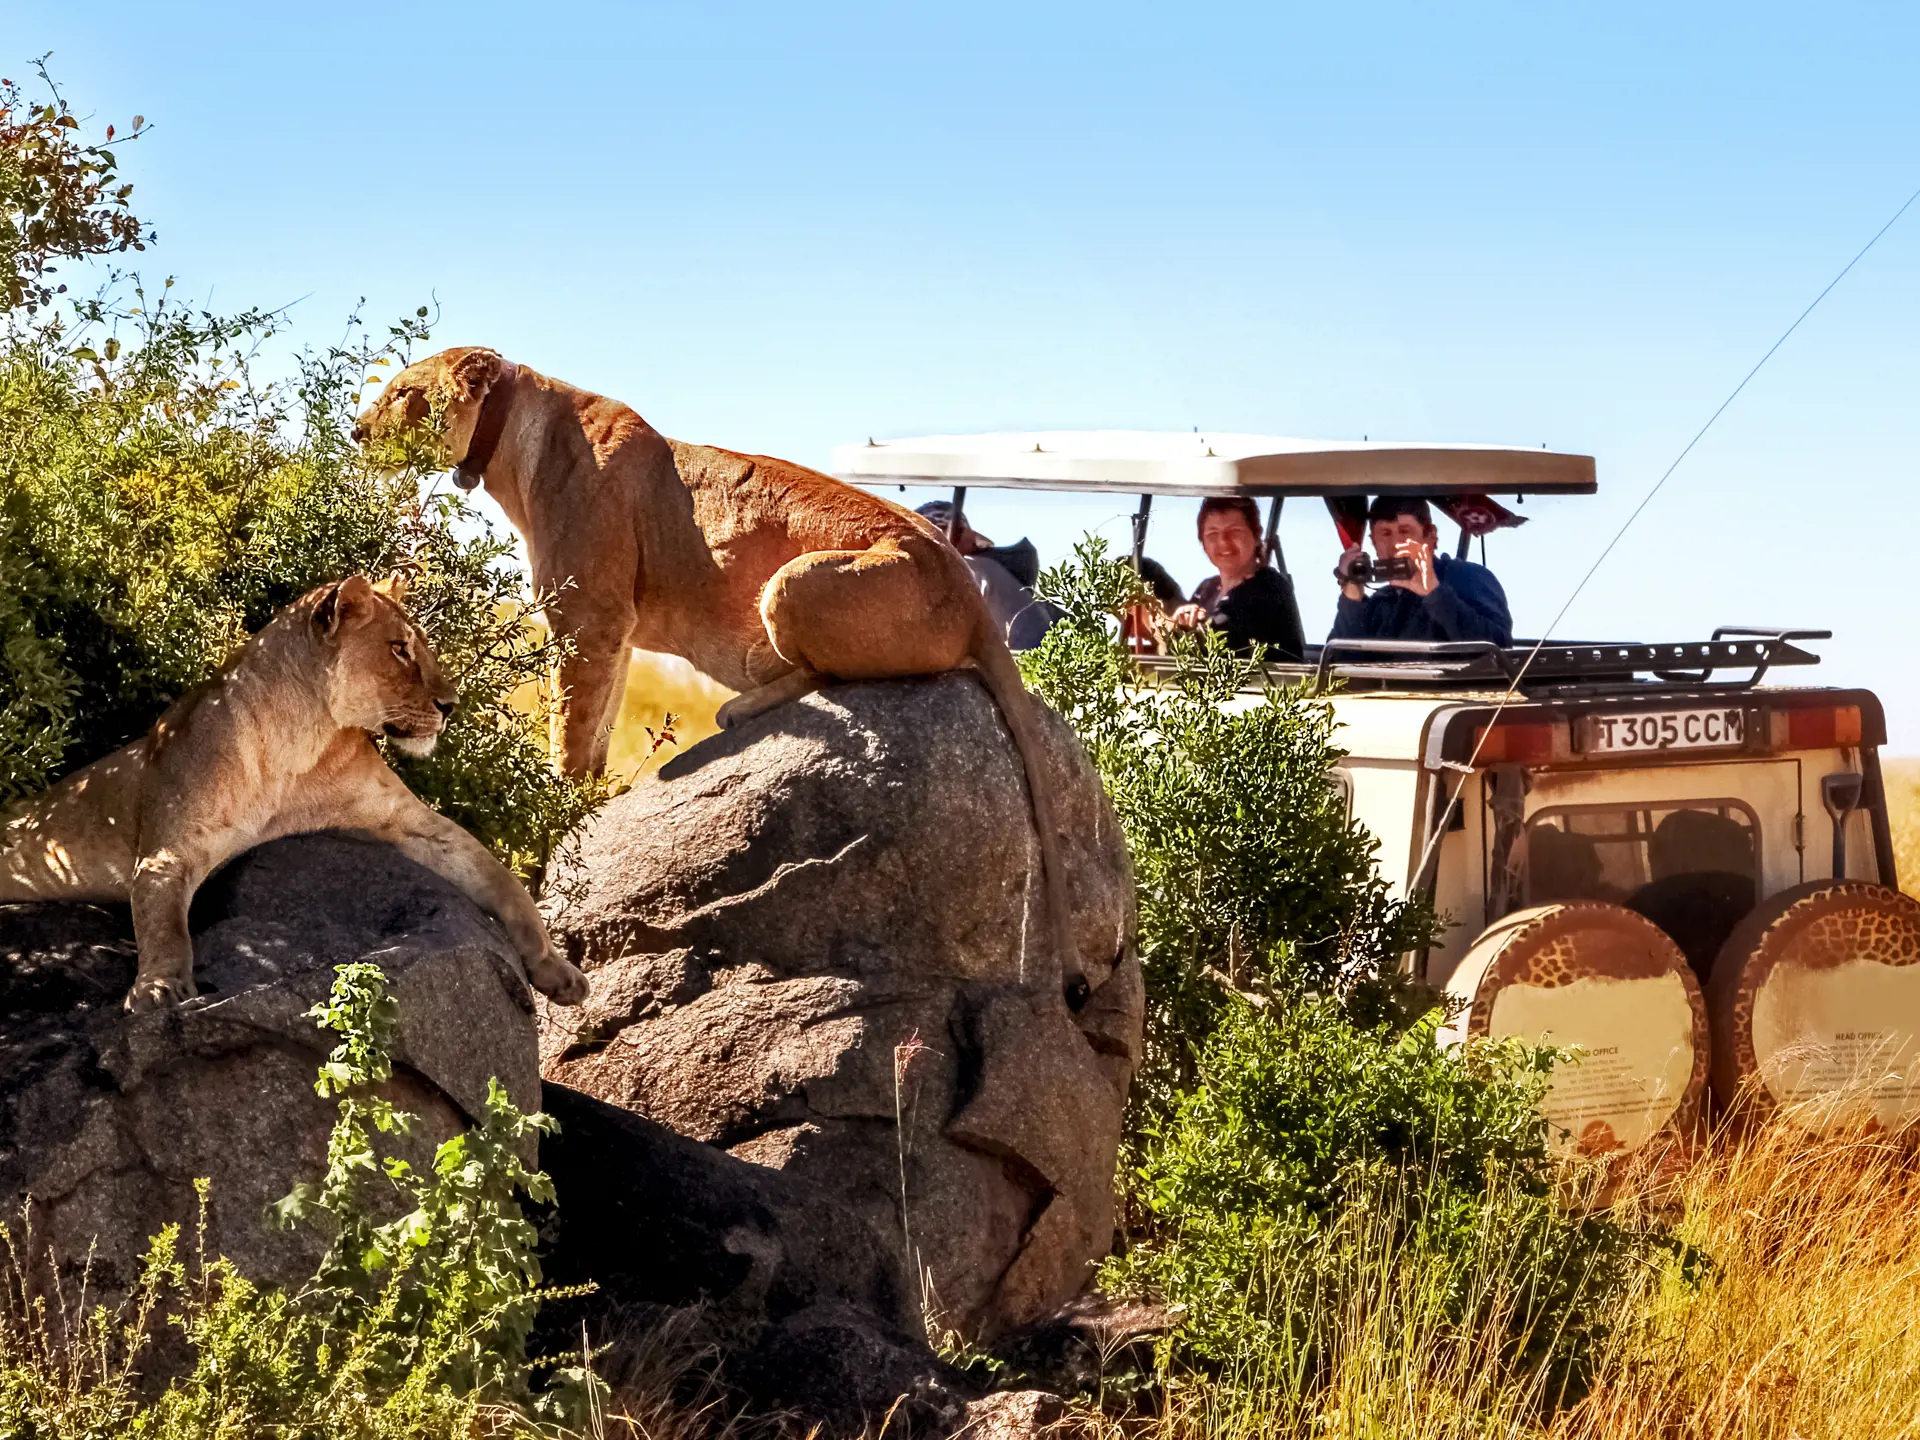 shutterstock_602600288 Africa, Tanzania, Serengeti National Park - March 2016 Jeep tourists photograph the pride of the lions..jpg